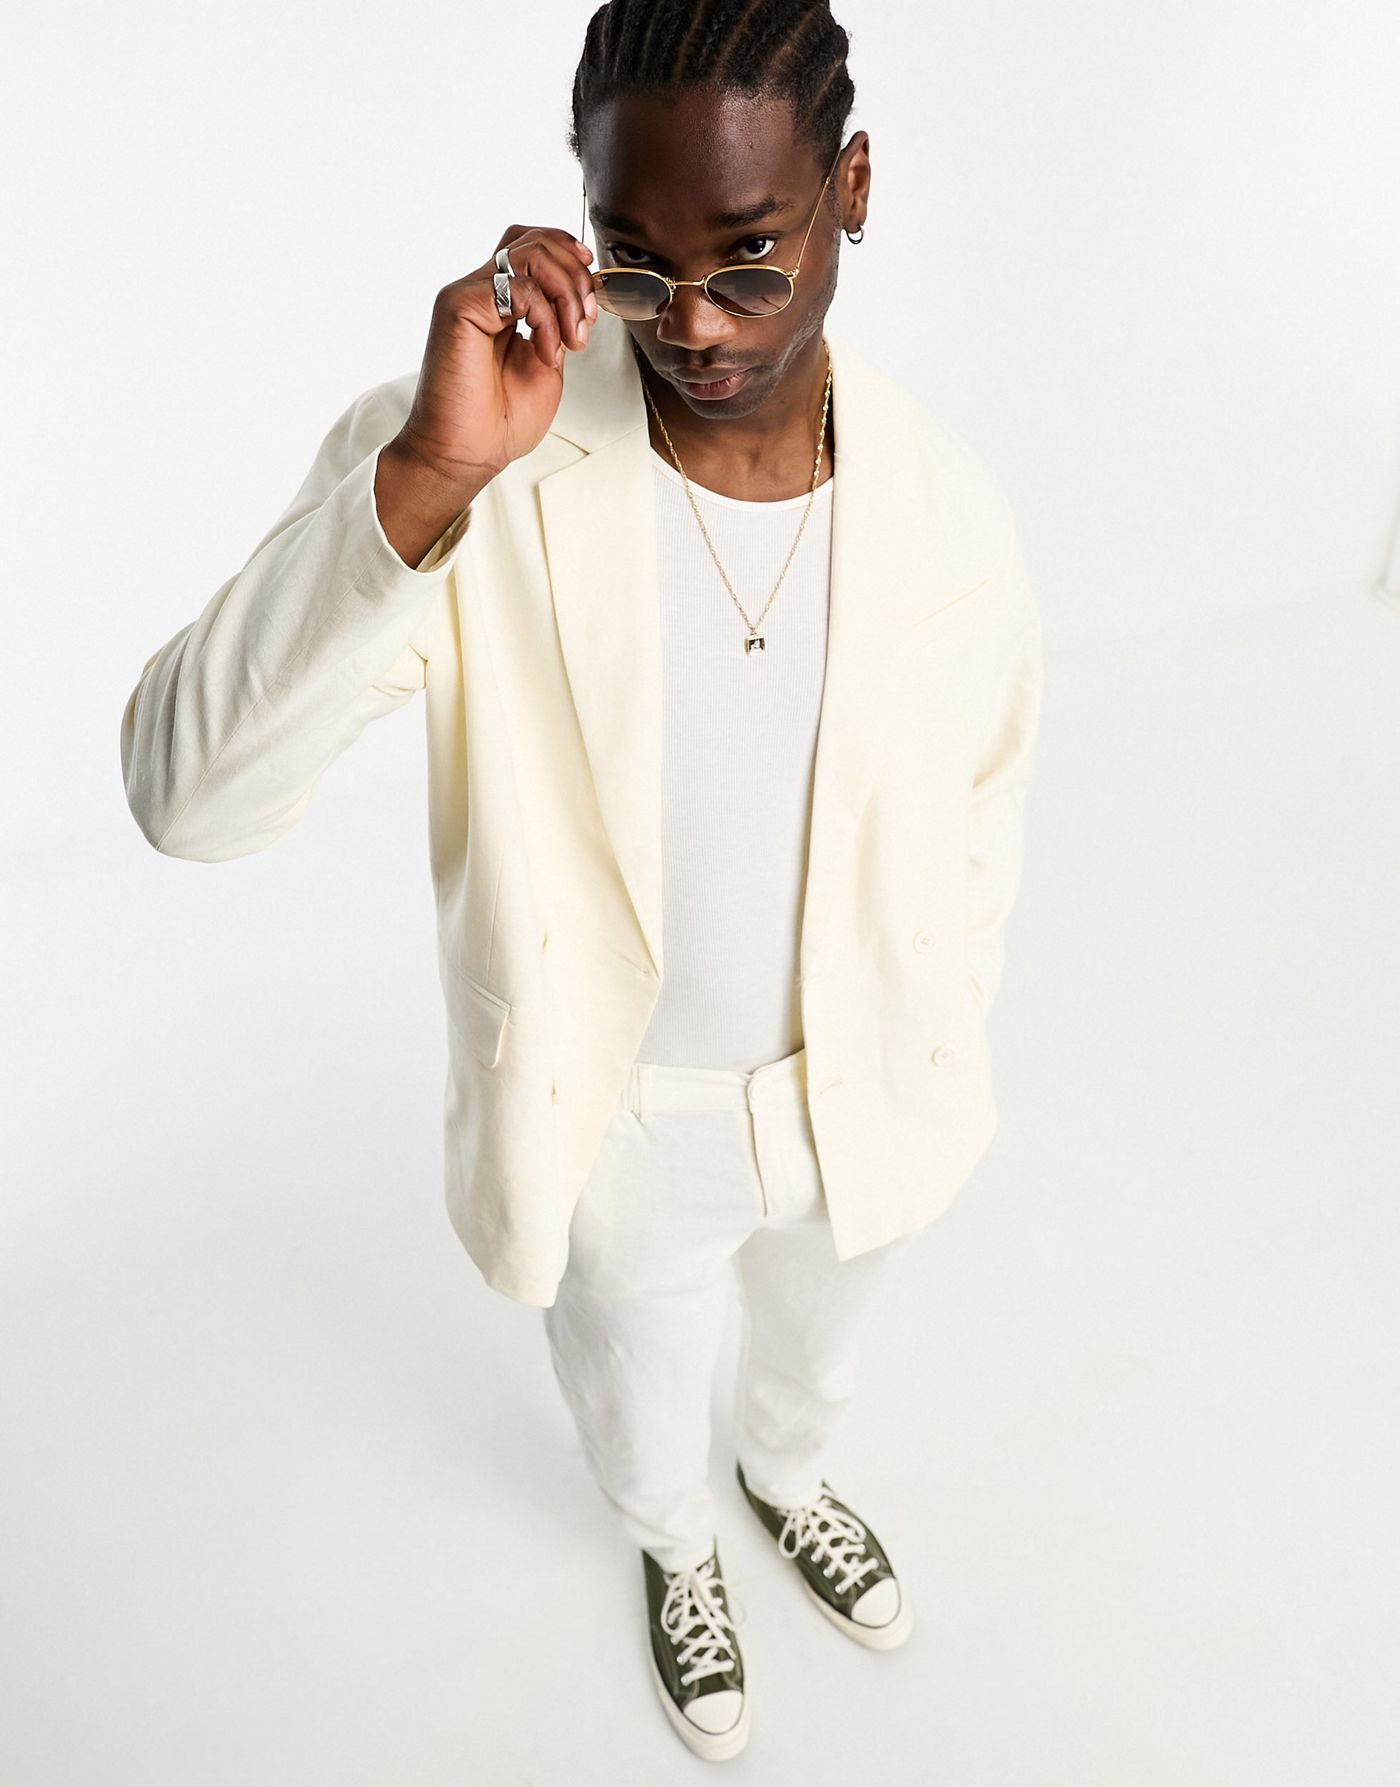 ADPT relaxed fit double breasted suit jacket in off white linen